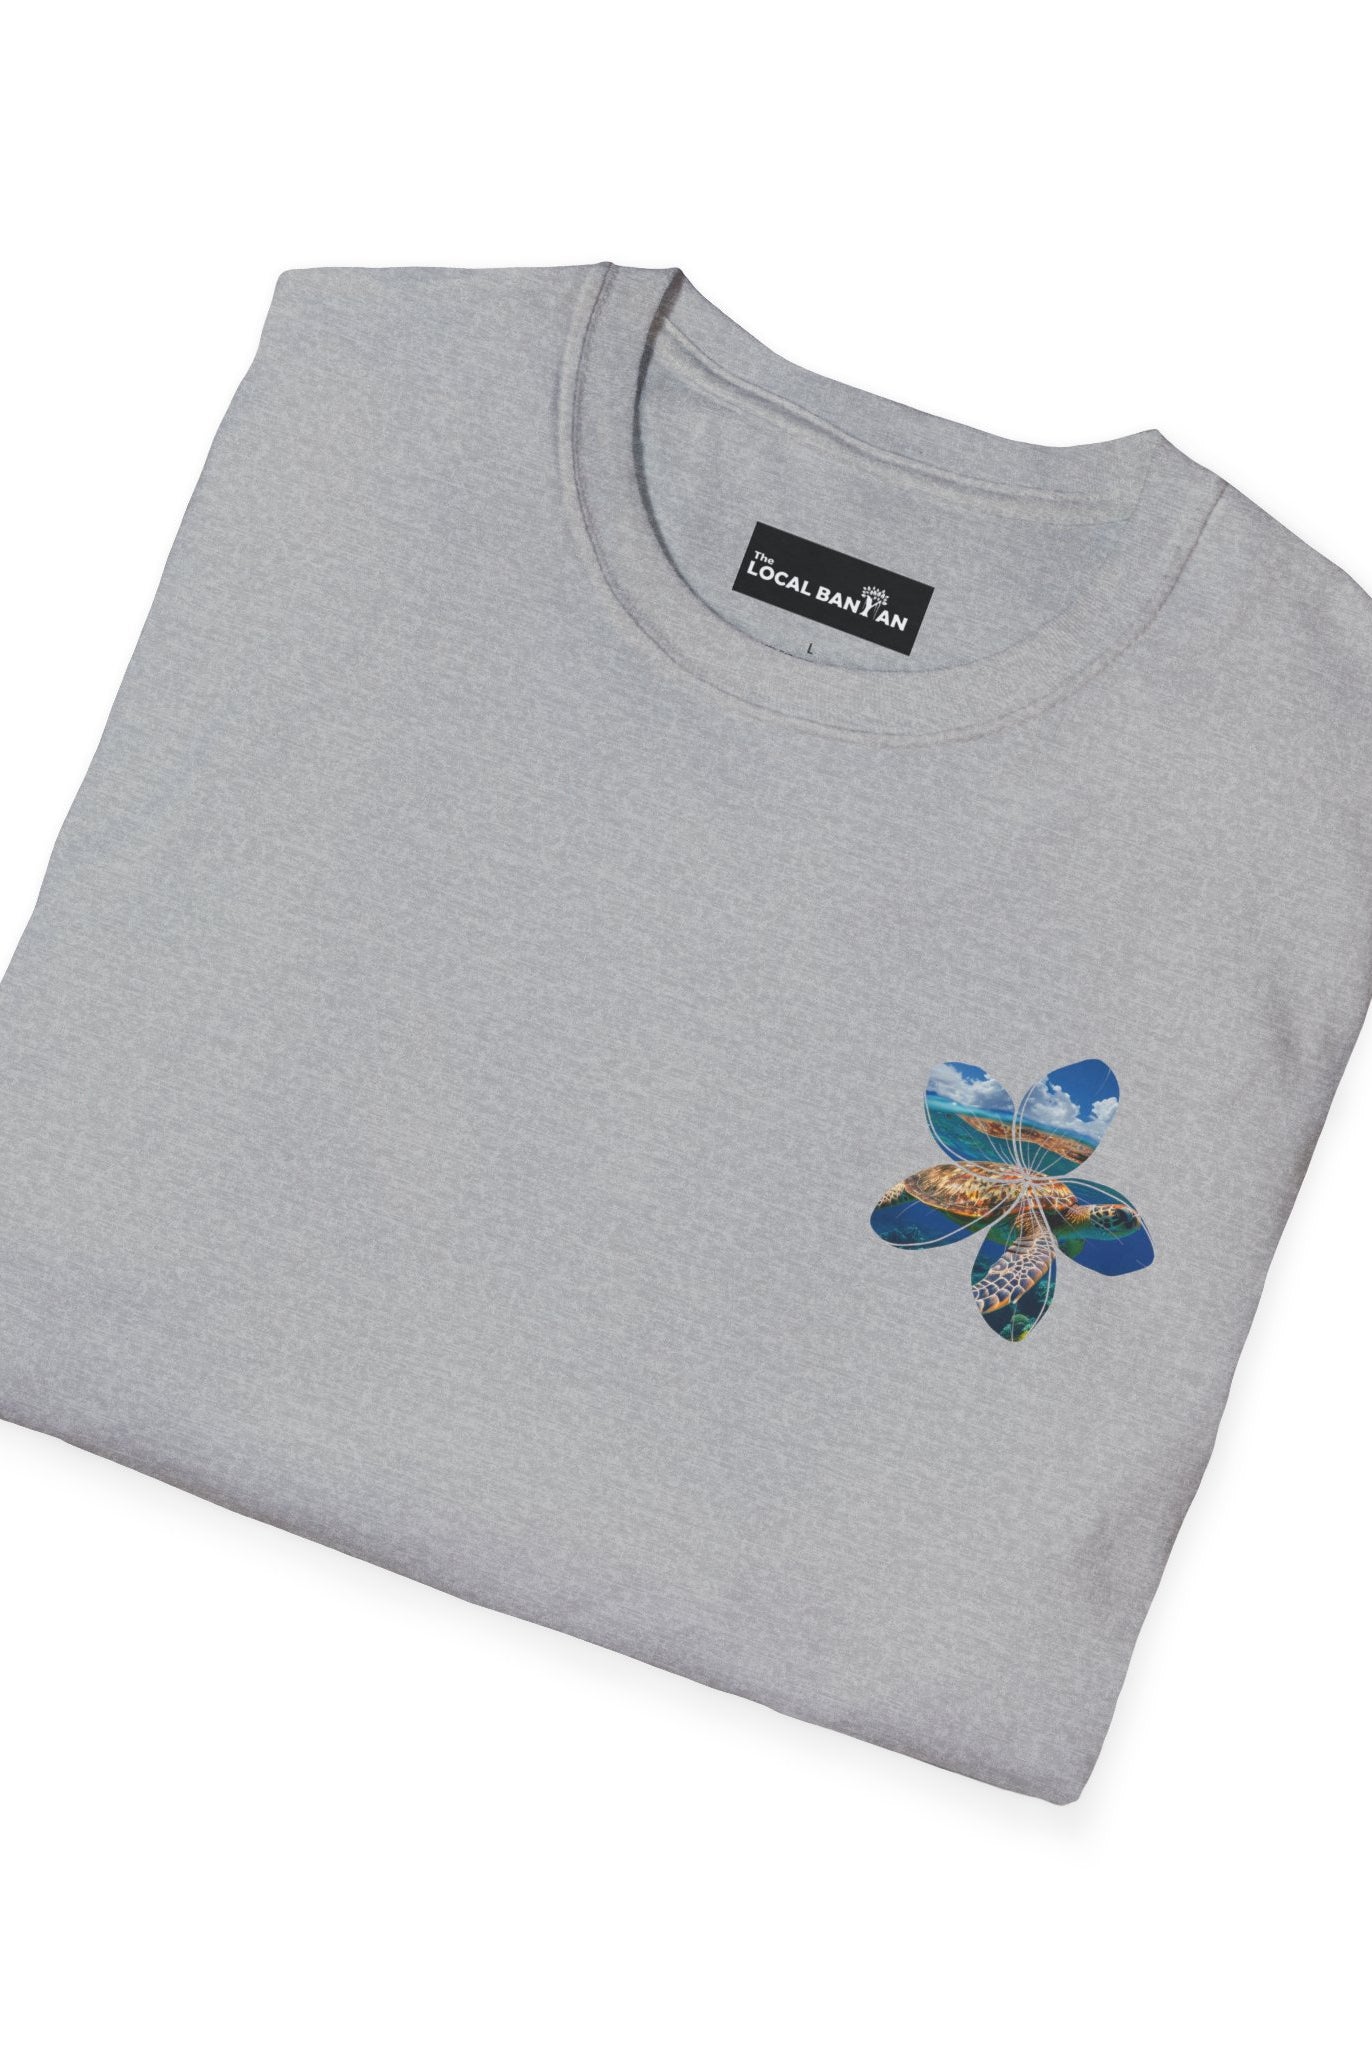 Turtle's Tranquility Plumeria Paradise Soft style Tee - The Local Banyan